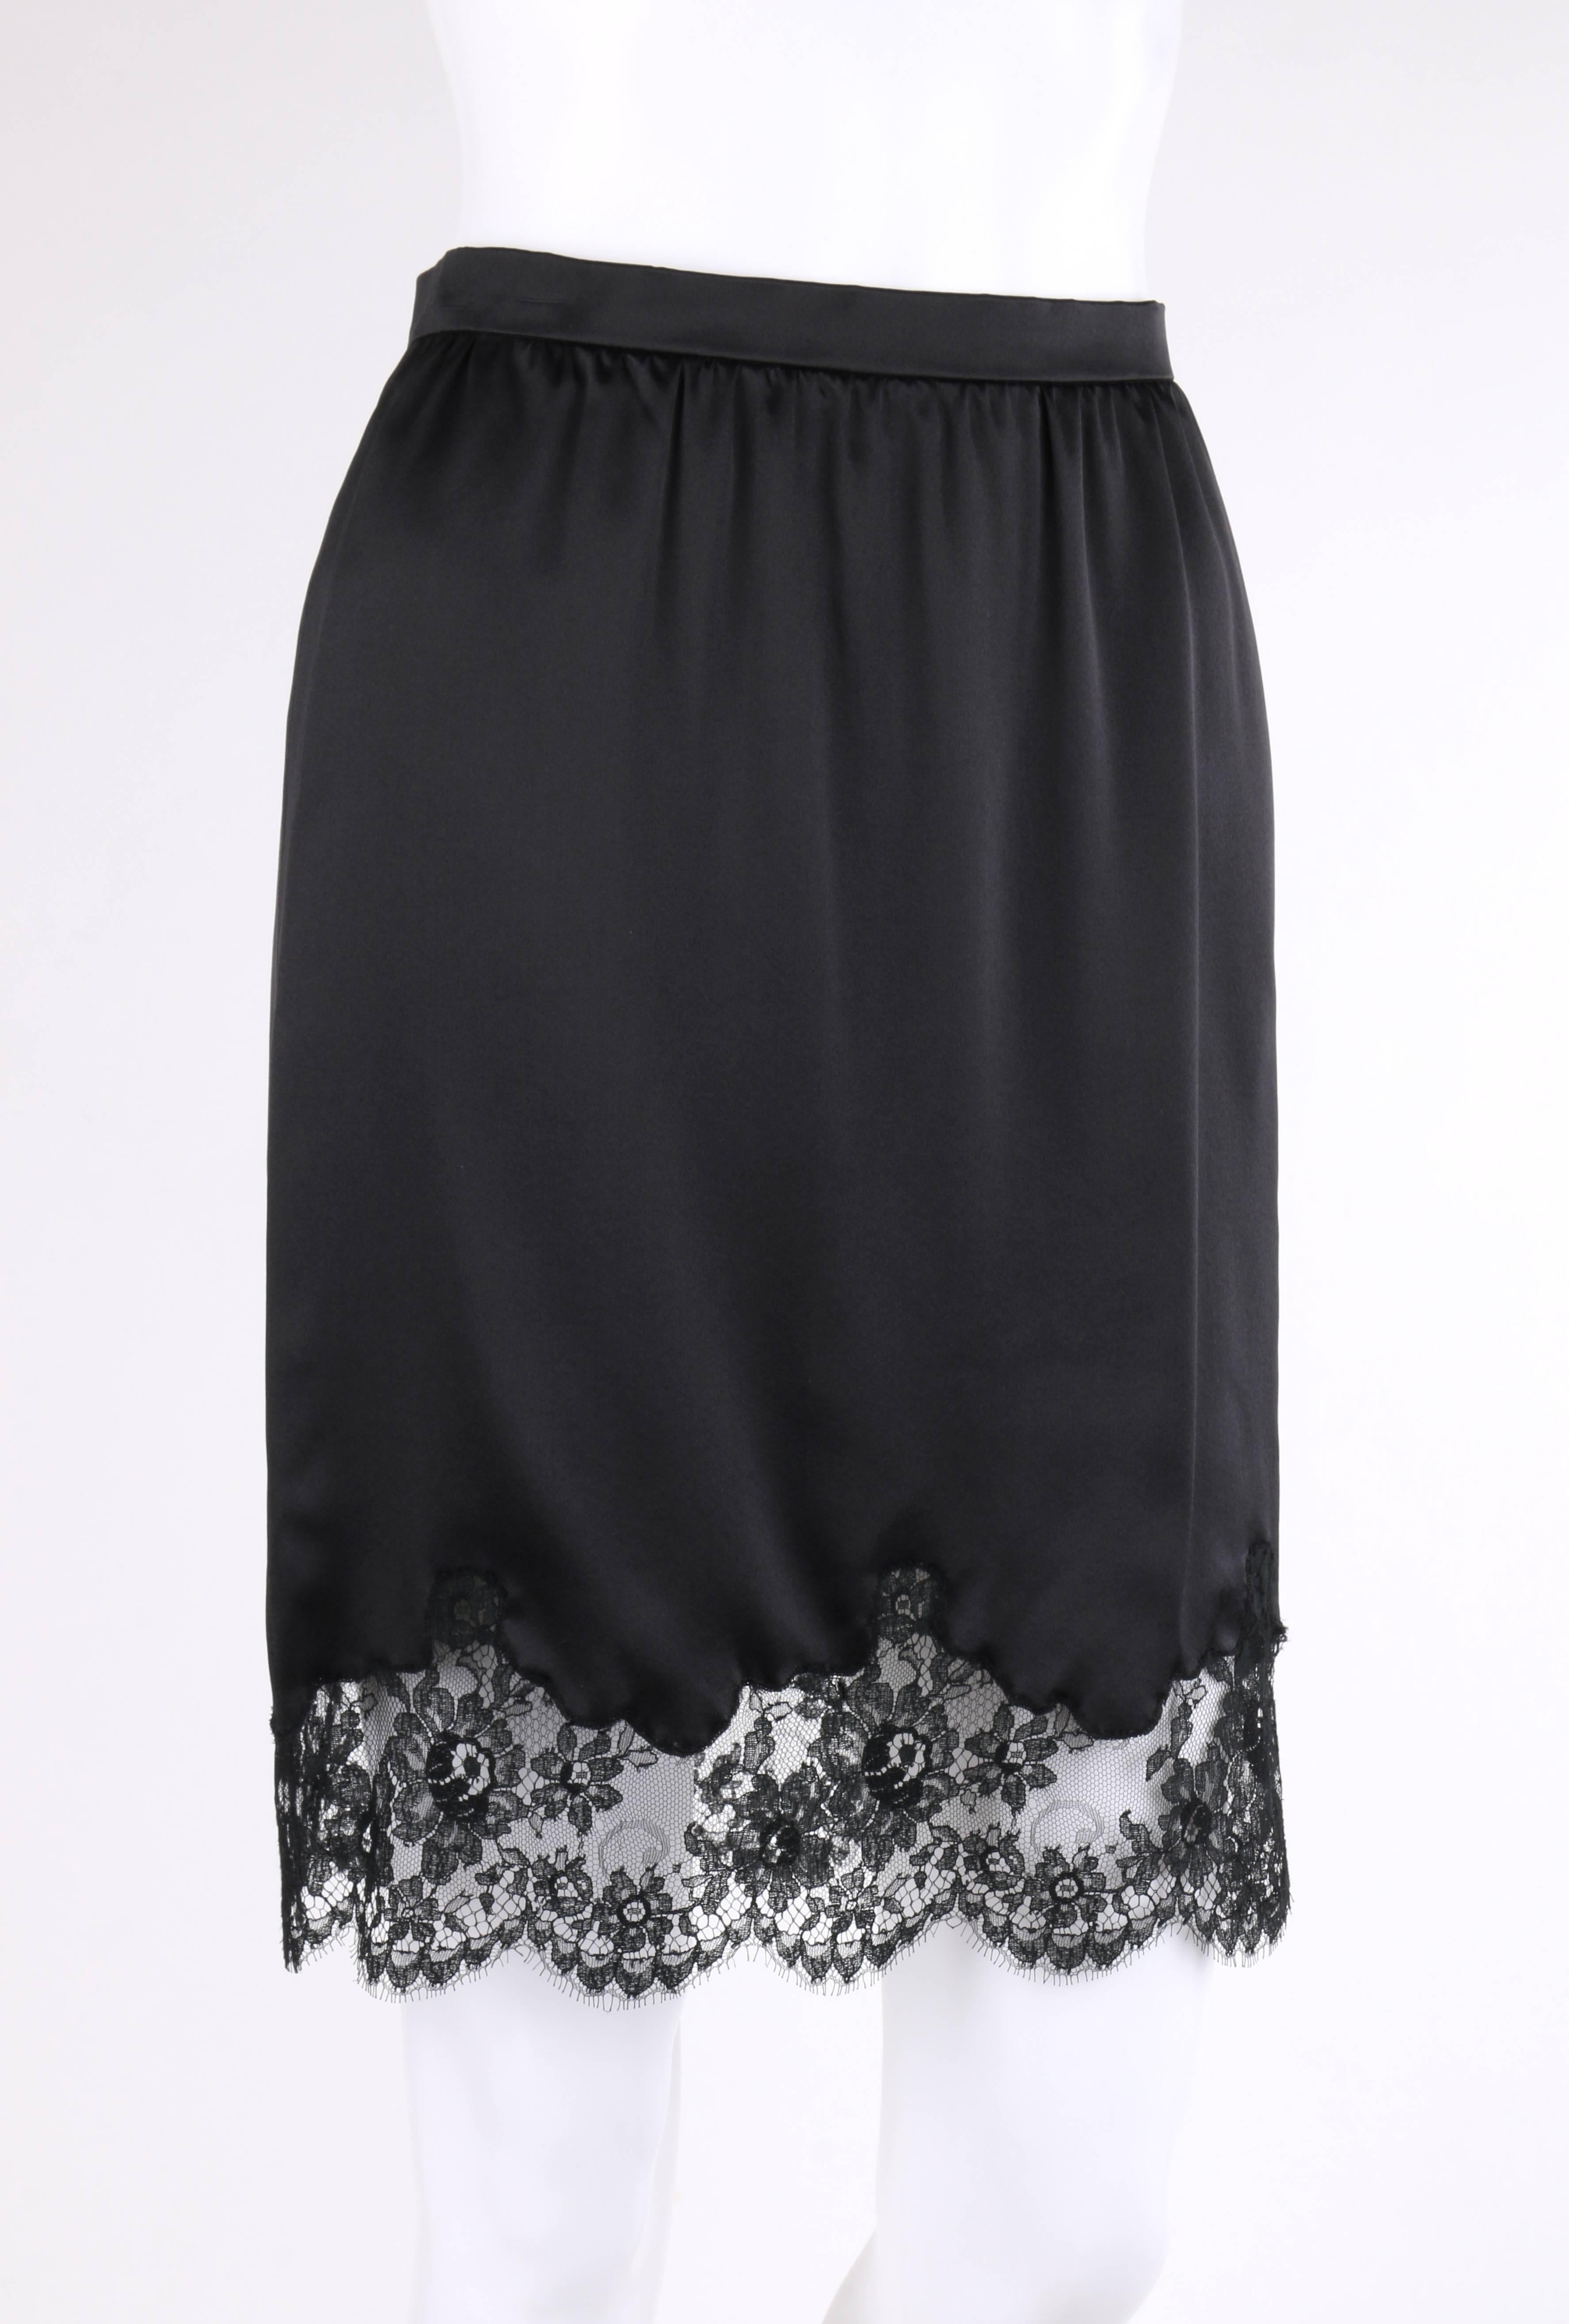 Valentino Roma black silk floral lace hem classic slip skirt. Thin banded waist. Left side seam invisible zipper closure. Gathered waistline. Black floral lace detail at hem with scalloped edge. Unlined. Marked Fabric Content: 